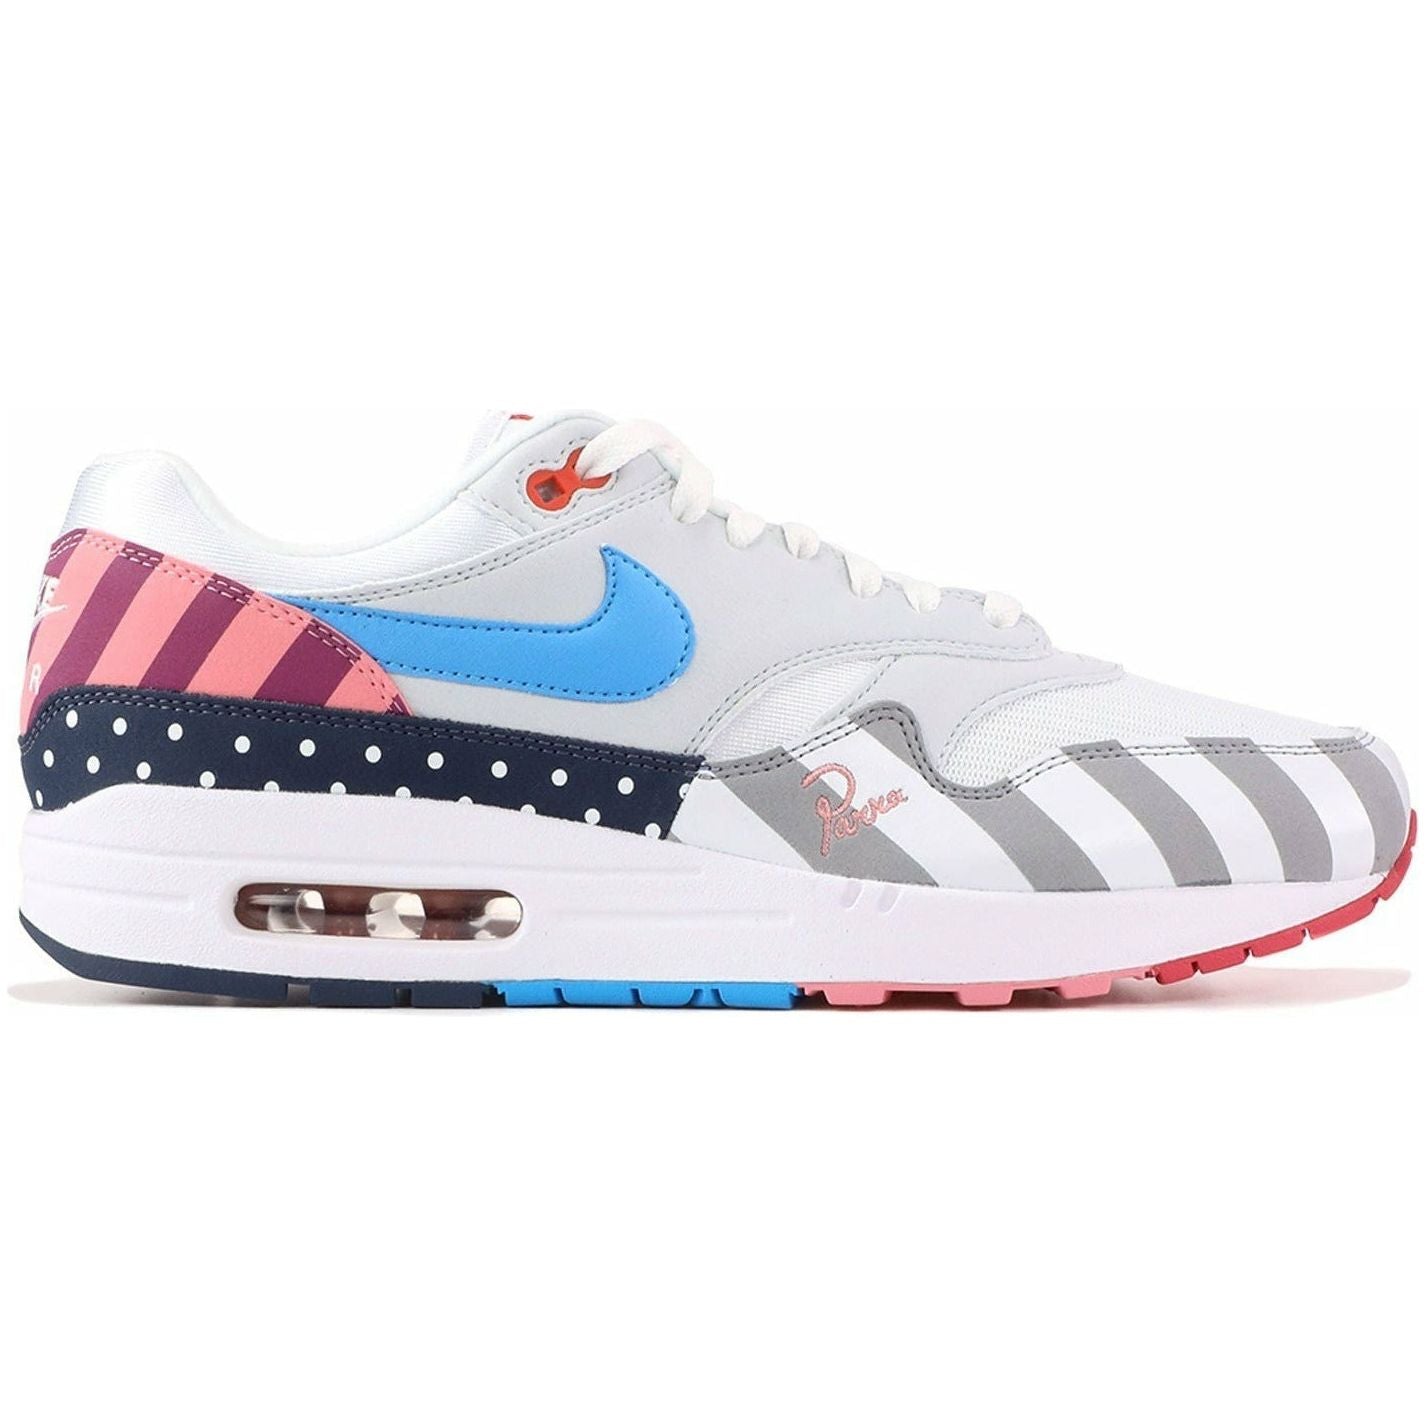 Nike Air Max 1 Parra by Nike from £500.00